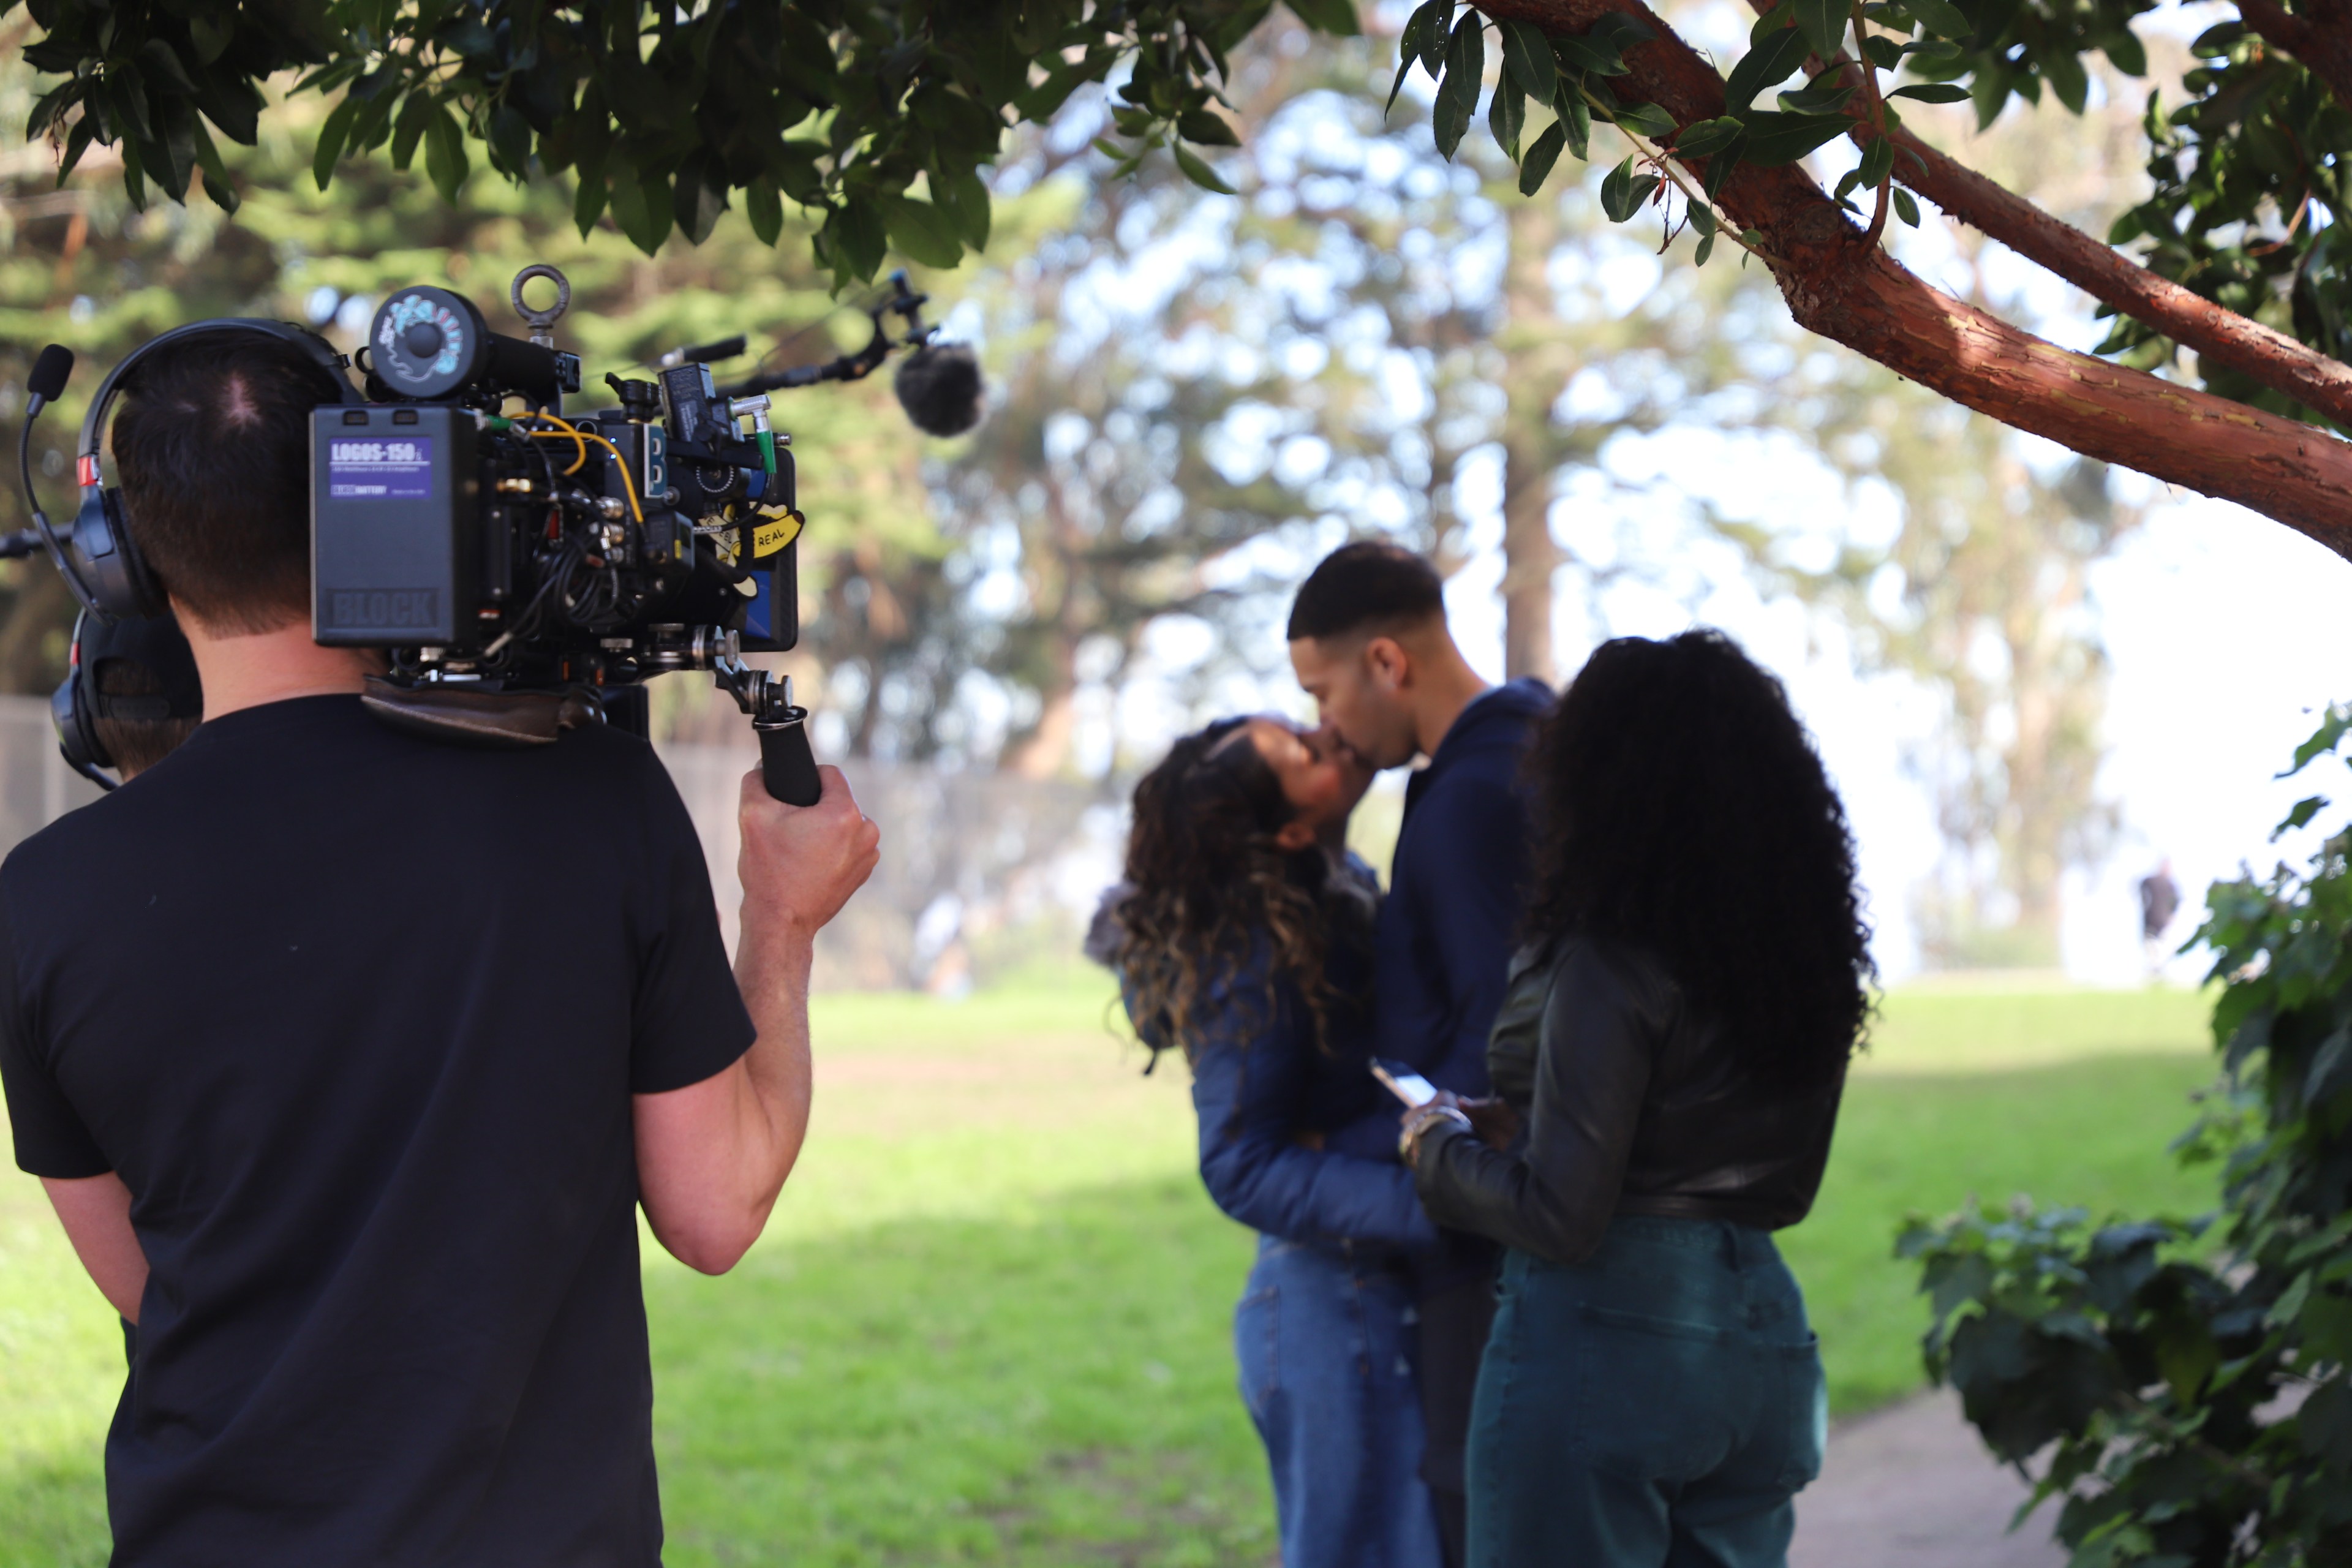 A cameraman films a couple kissing in a park, while another person watches, surrounded by trees.